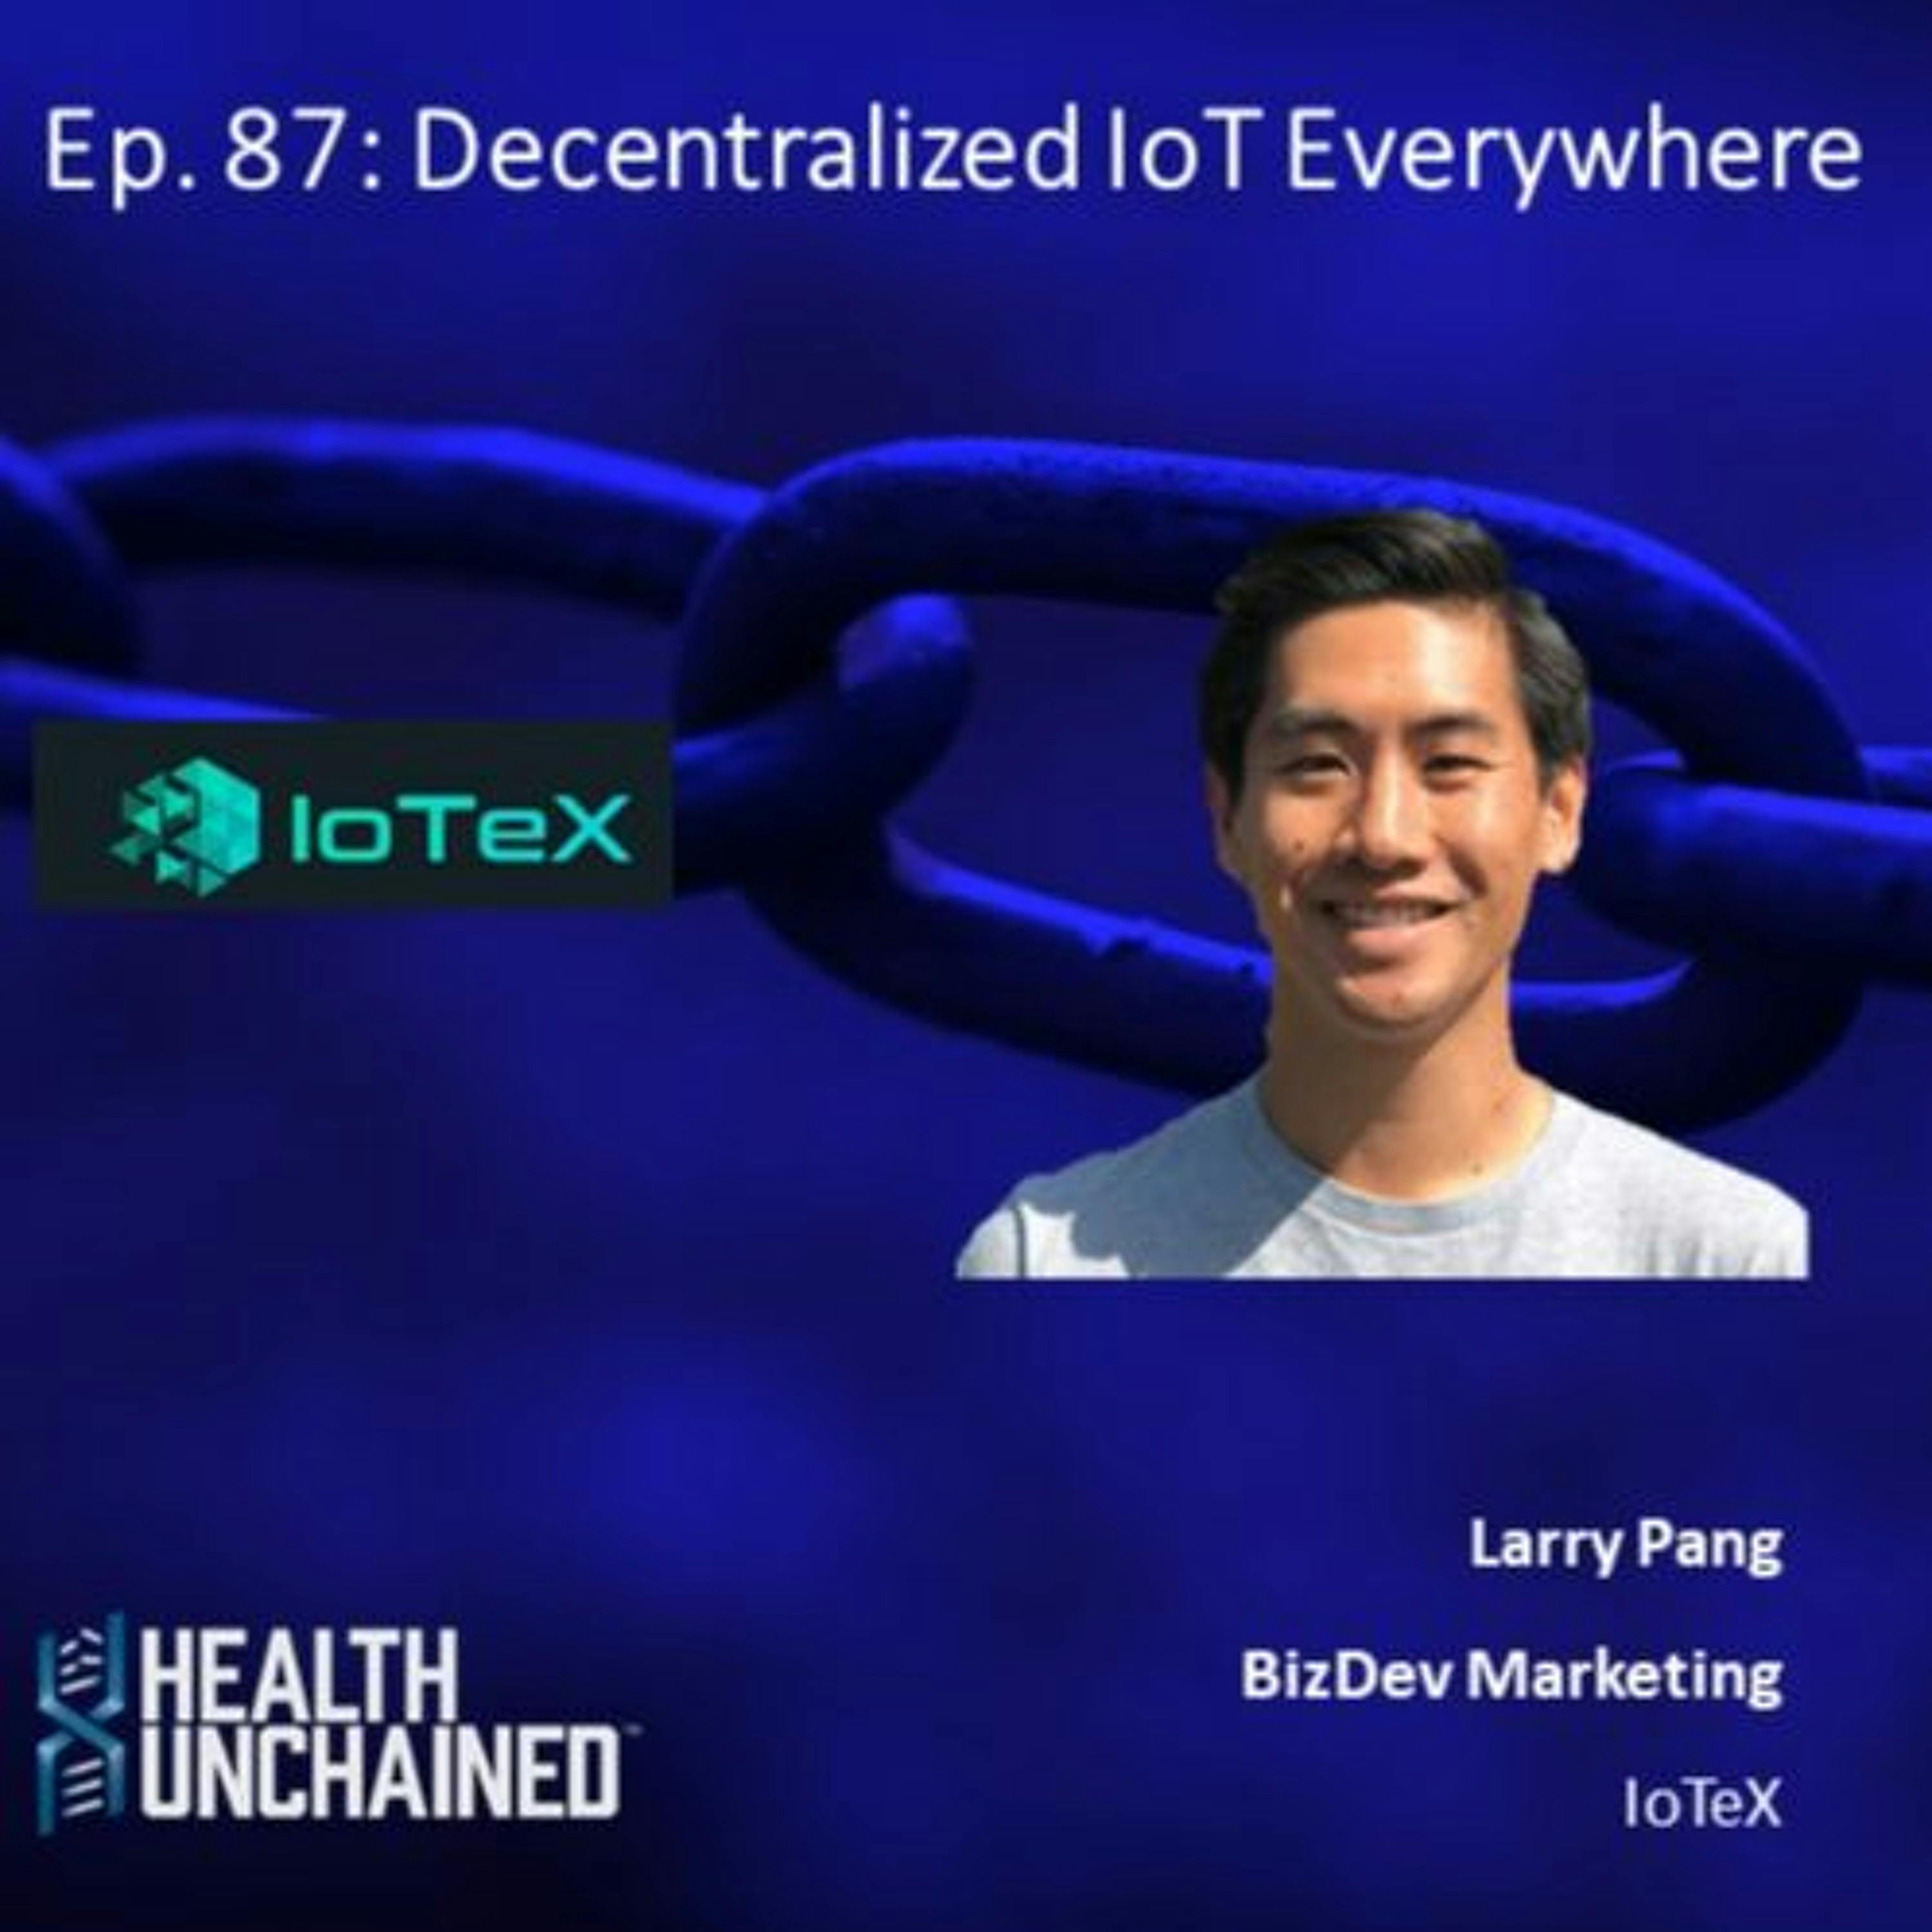 Ep. 87: Decentralized IoT Everywhere – Larry Pang (IoTeX)